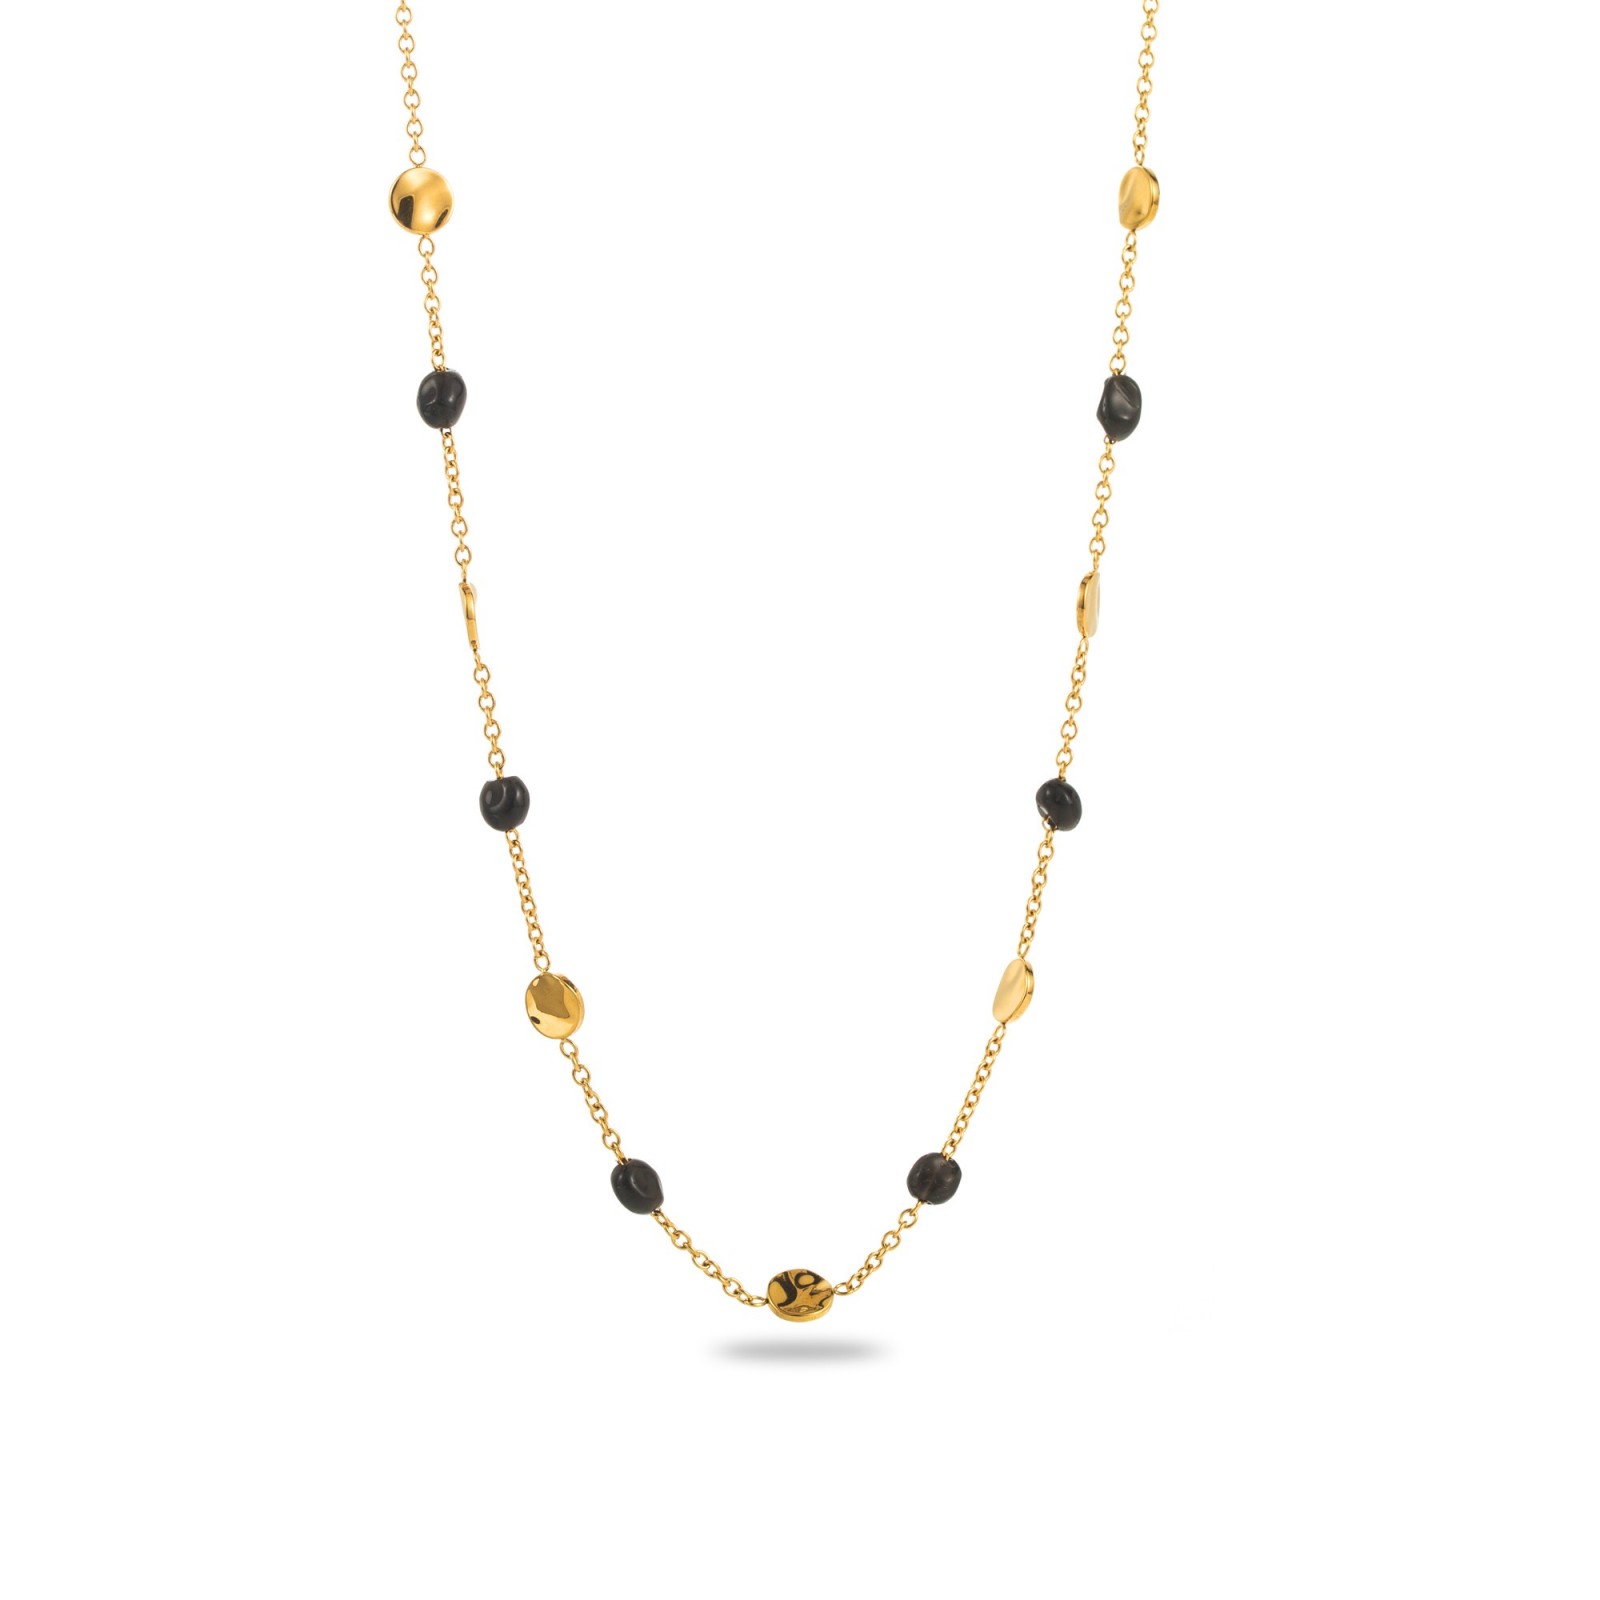 Fine Stone Beads and Hammered Mini Tassels Necklace Stone:Onyx